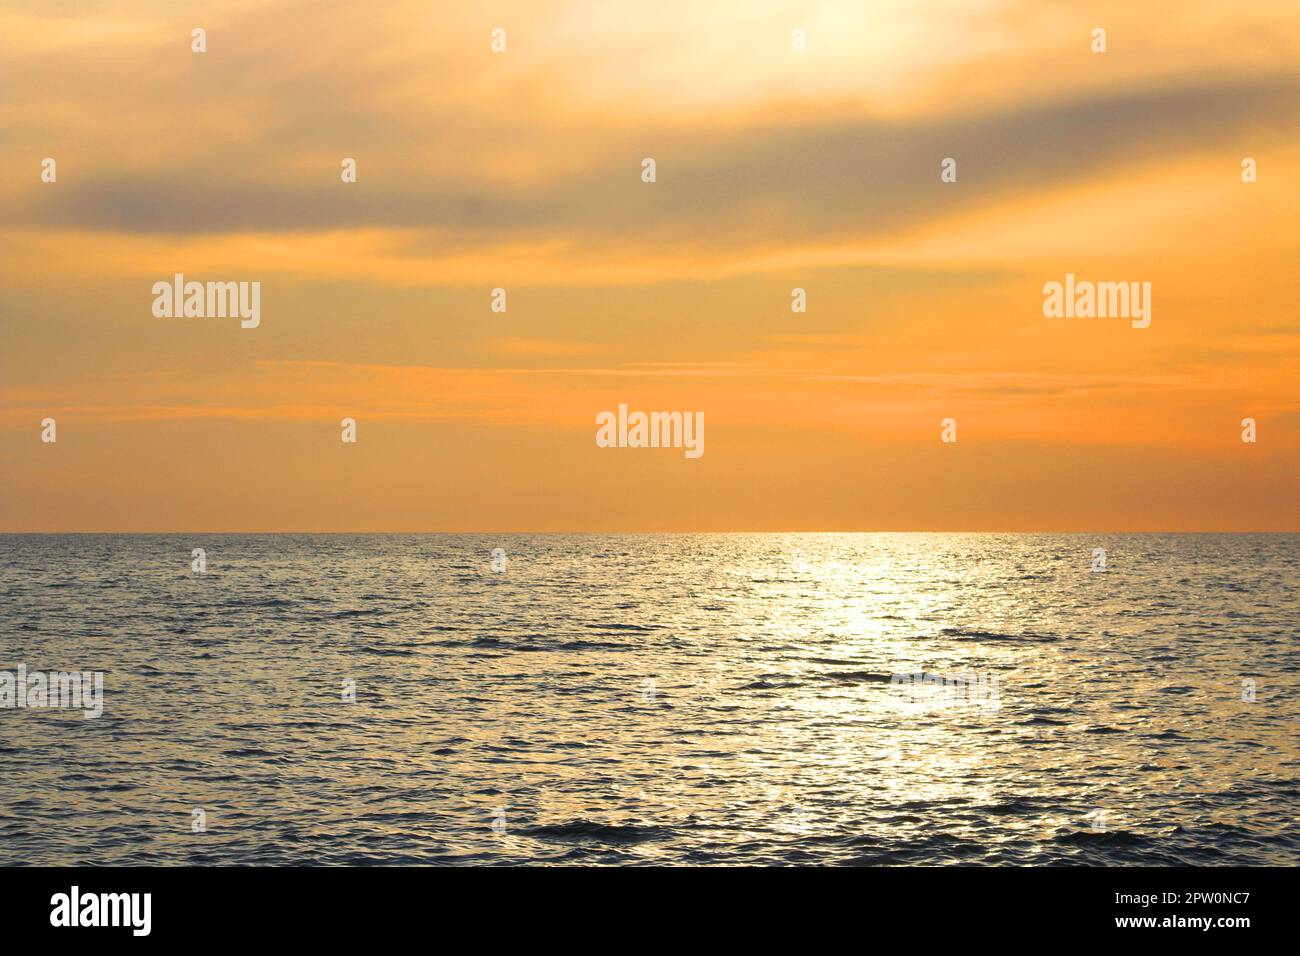 Beautiful sunset landscape at Mediterranean sea and orange sky above it with awesome sun golden reflection on calm waves. Amazing summer sunset view o Stock Photo